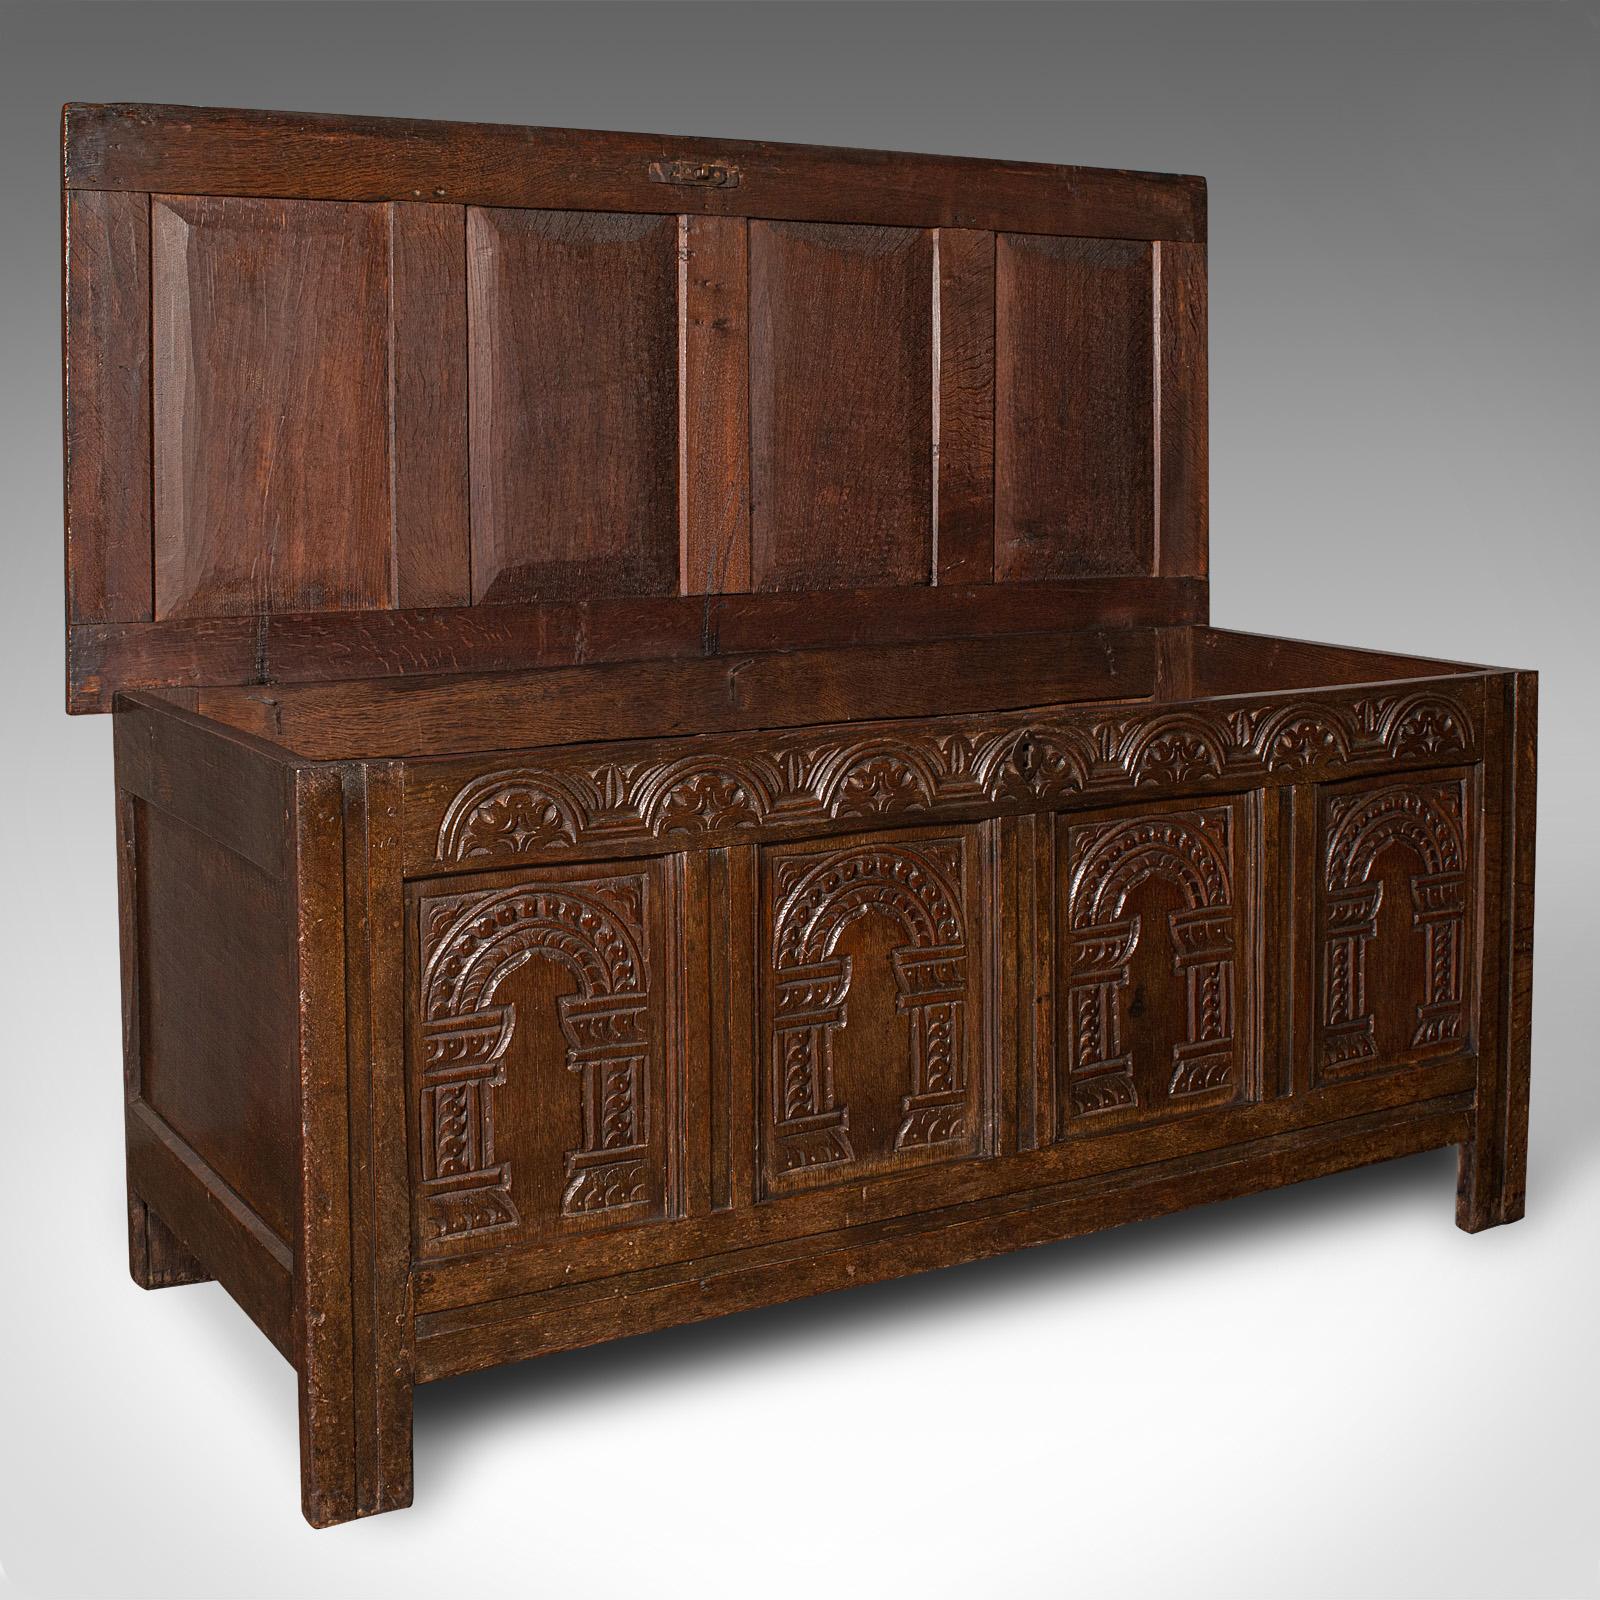 This is a large antique 4 panel coffer. An English, oak carved trunk or window seat, dating to the William III period, circa 1700.

Superb example with appealing carving and stout antique stocks
Displays a desirable aged patina and in good order